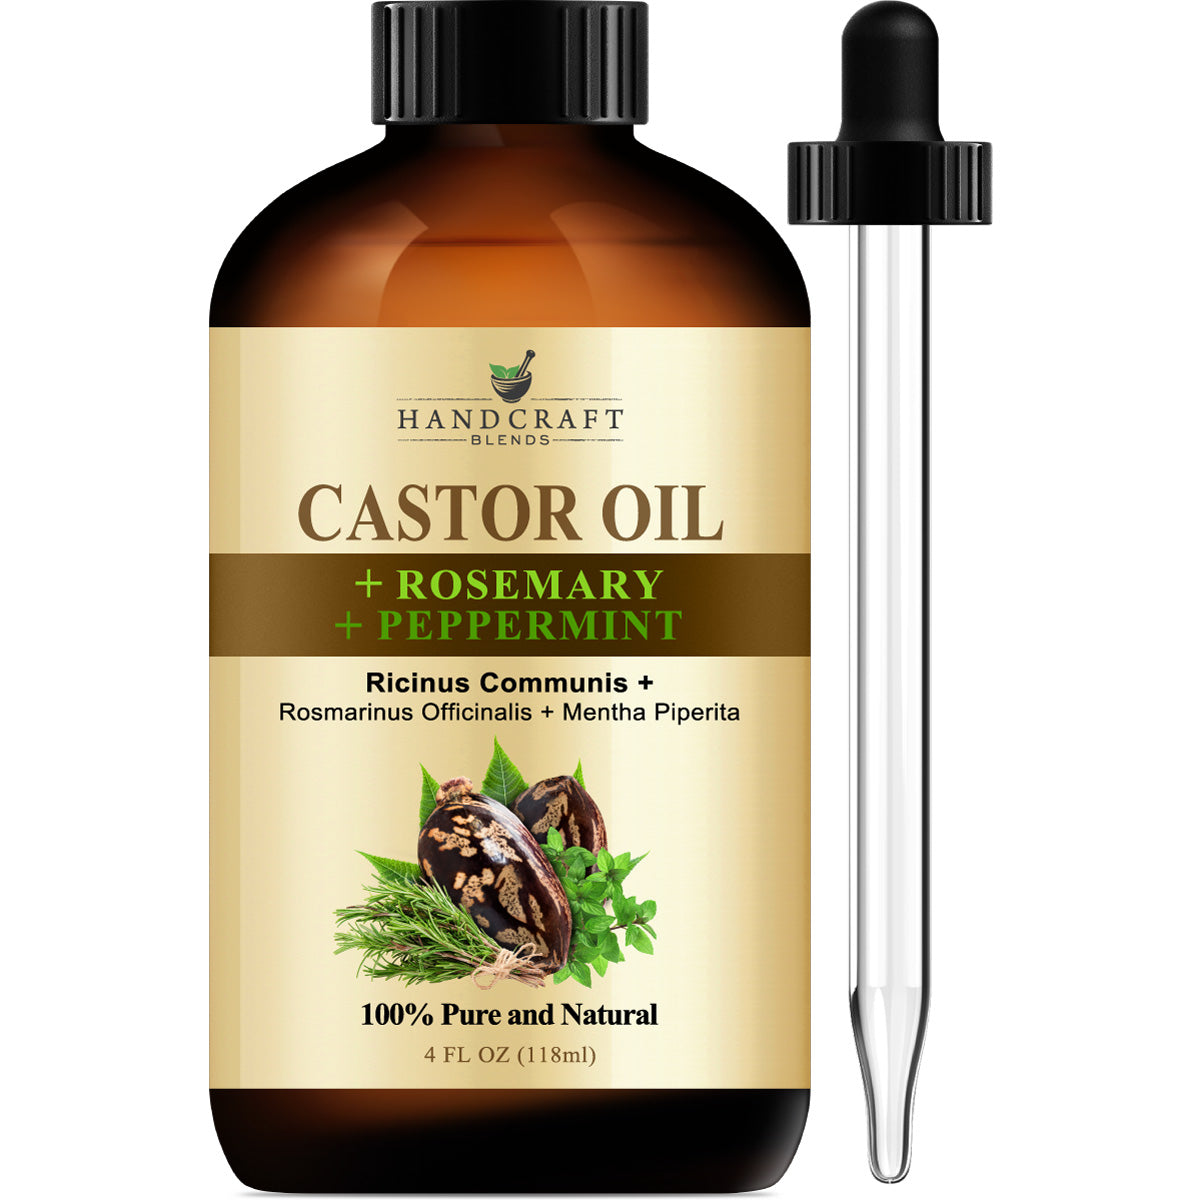 Handcraft Castor Oil + Rosemary + Peppermint Oil - 100% Pure and Natur ...